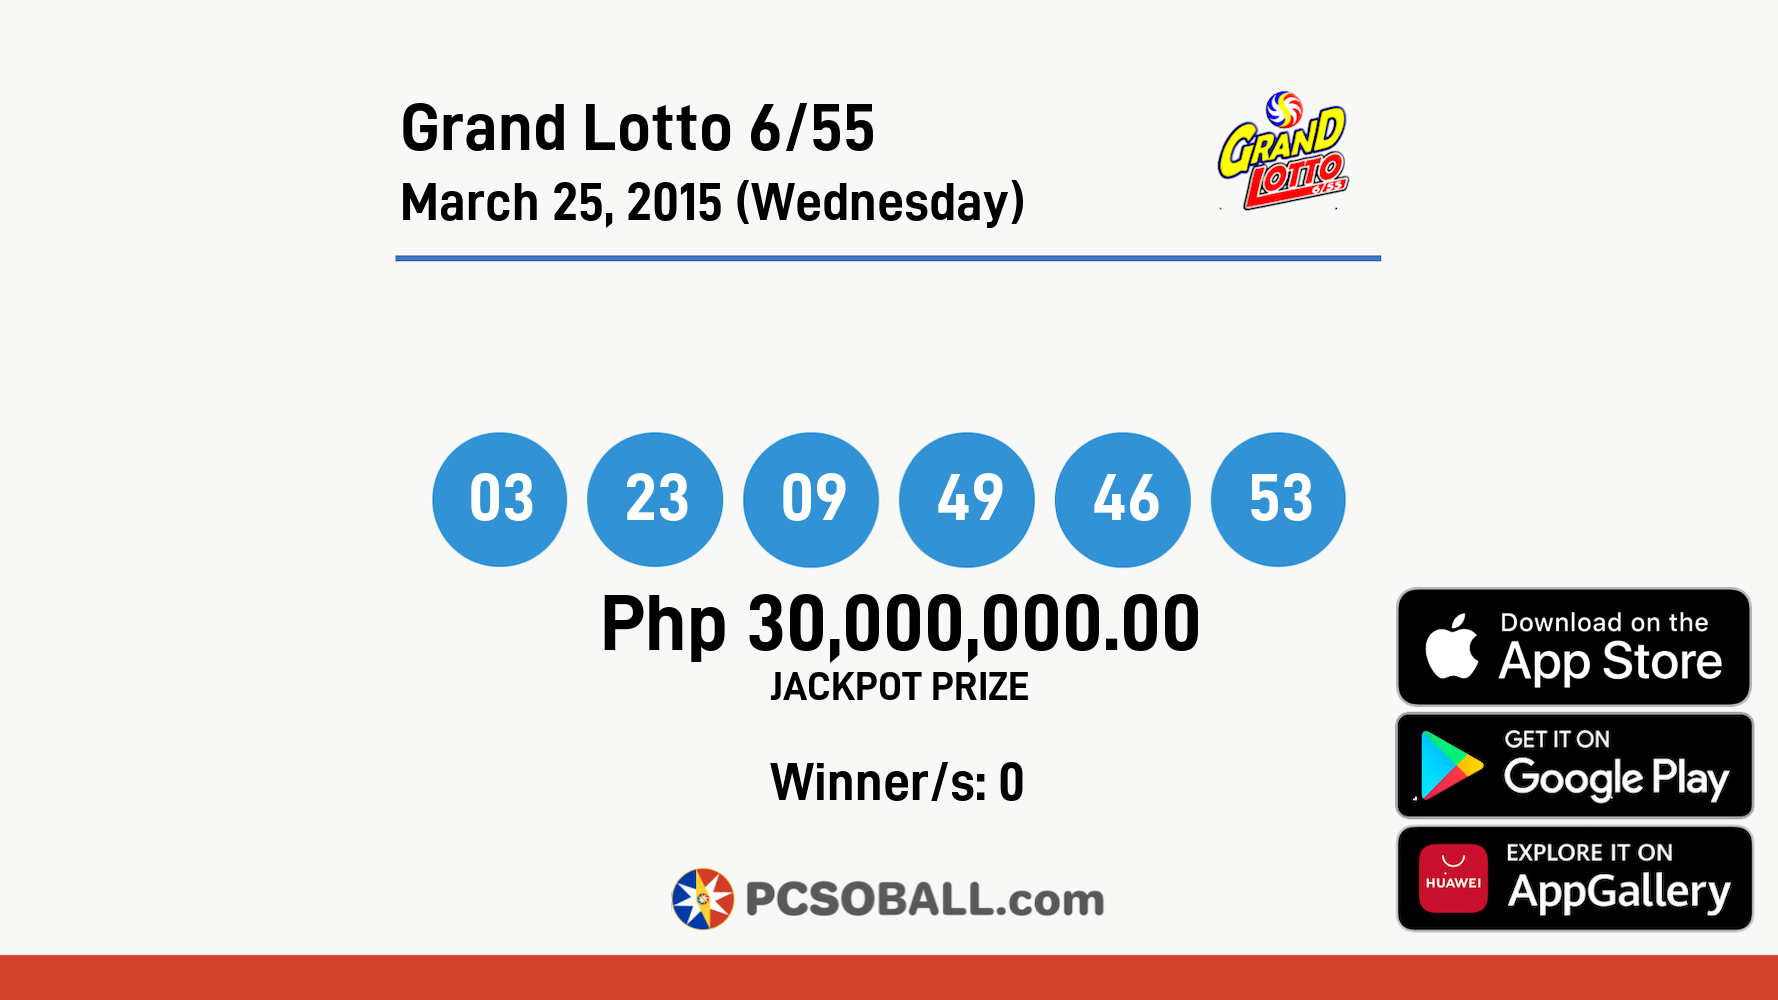 Grand Lotto 6/55 March 25, 2015 (Wednesday) Result